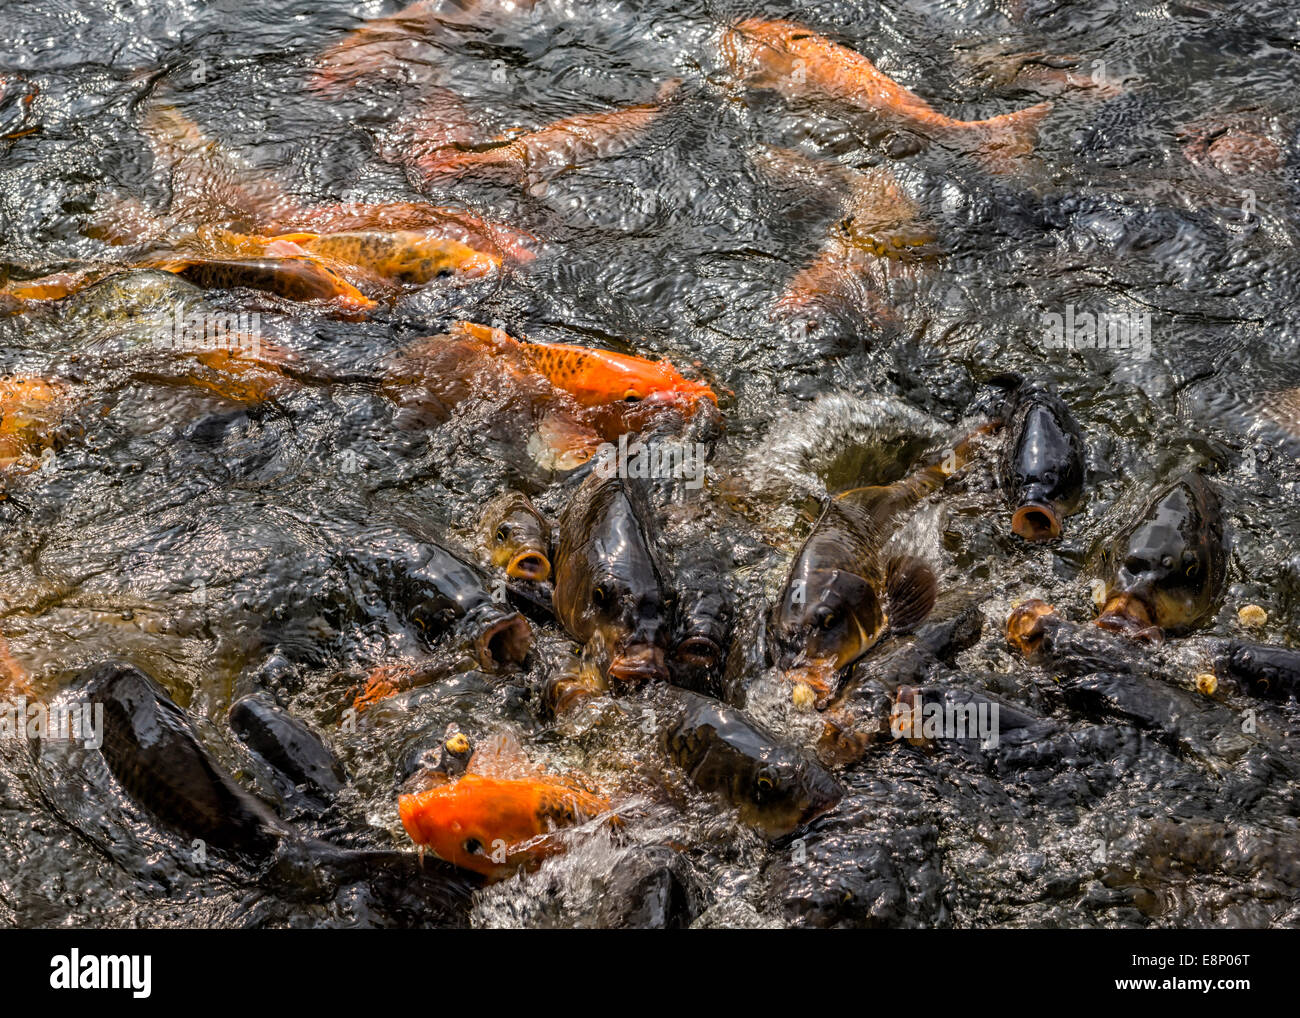 Close up of gluttonous fish tumbling over each other because they expect food. Stock Photo